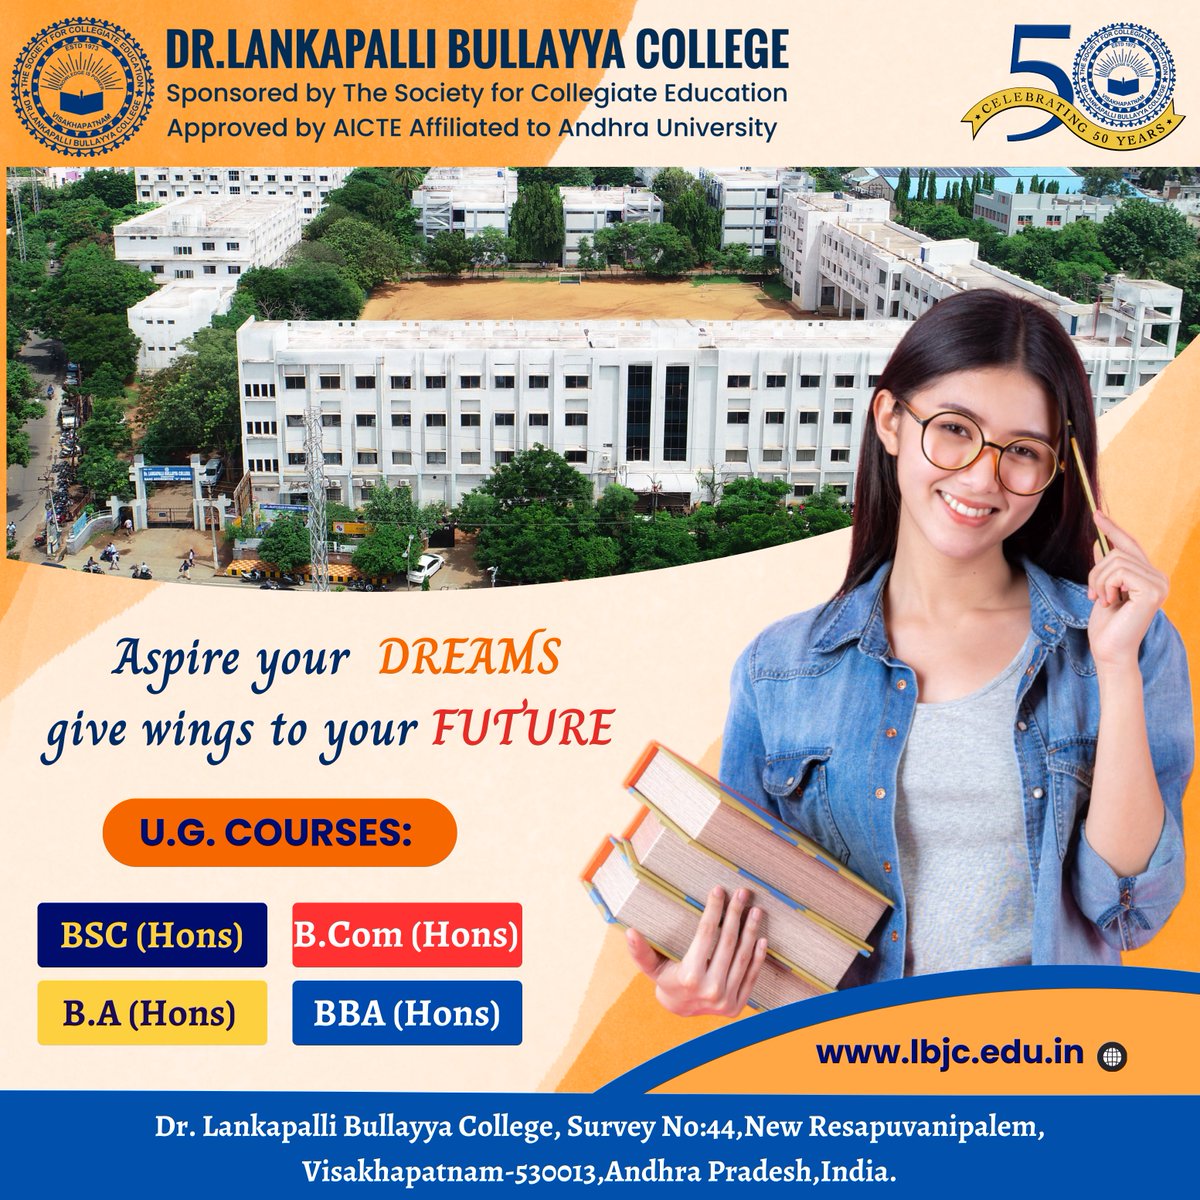 Aspire your Dreams, give wings to your future. UG Courses:

BSC(Hons)
BA(Hons)
B.com(Hons)
BBA(Hons)

#DegreeCollege #DrlbCollege#TransformYourFuture #UGCourses #empoweringeducation #students #DrLBCollege #Vizag #visakhapatnam